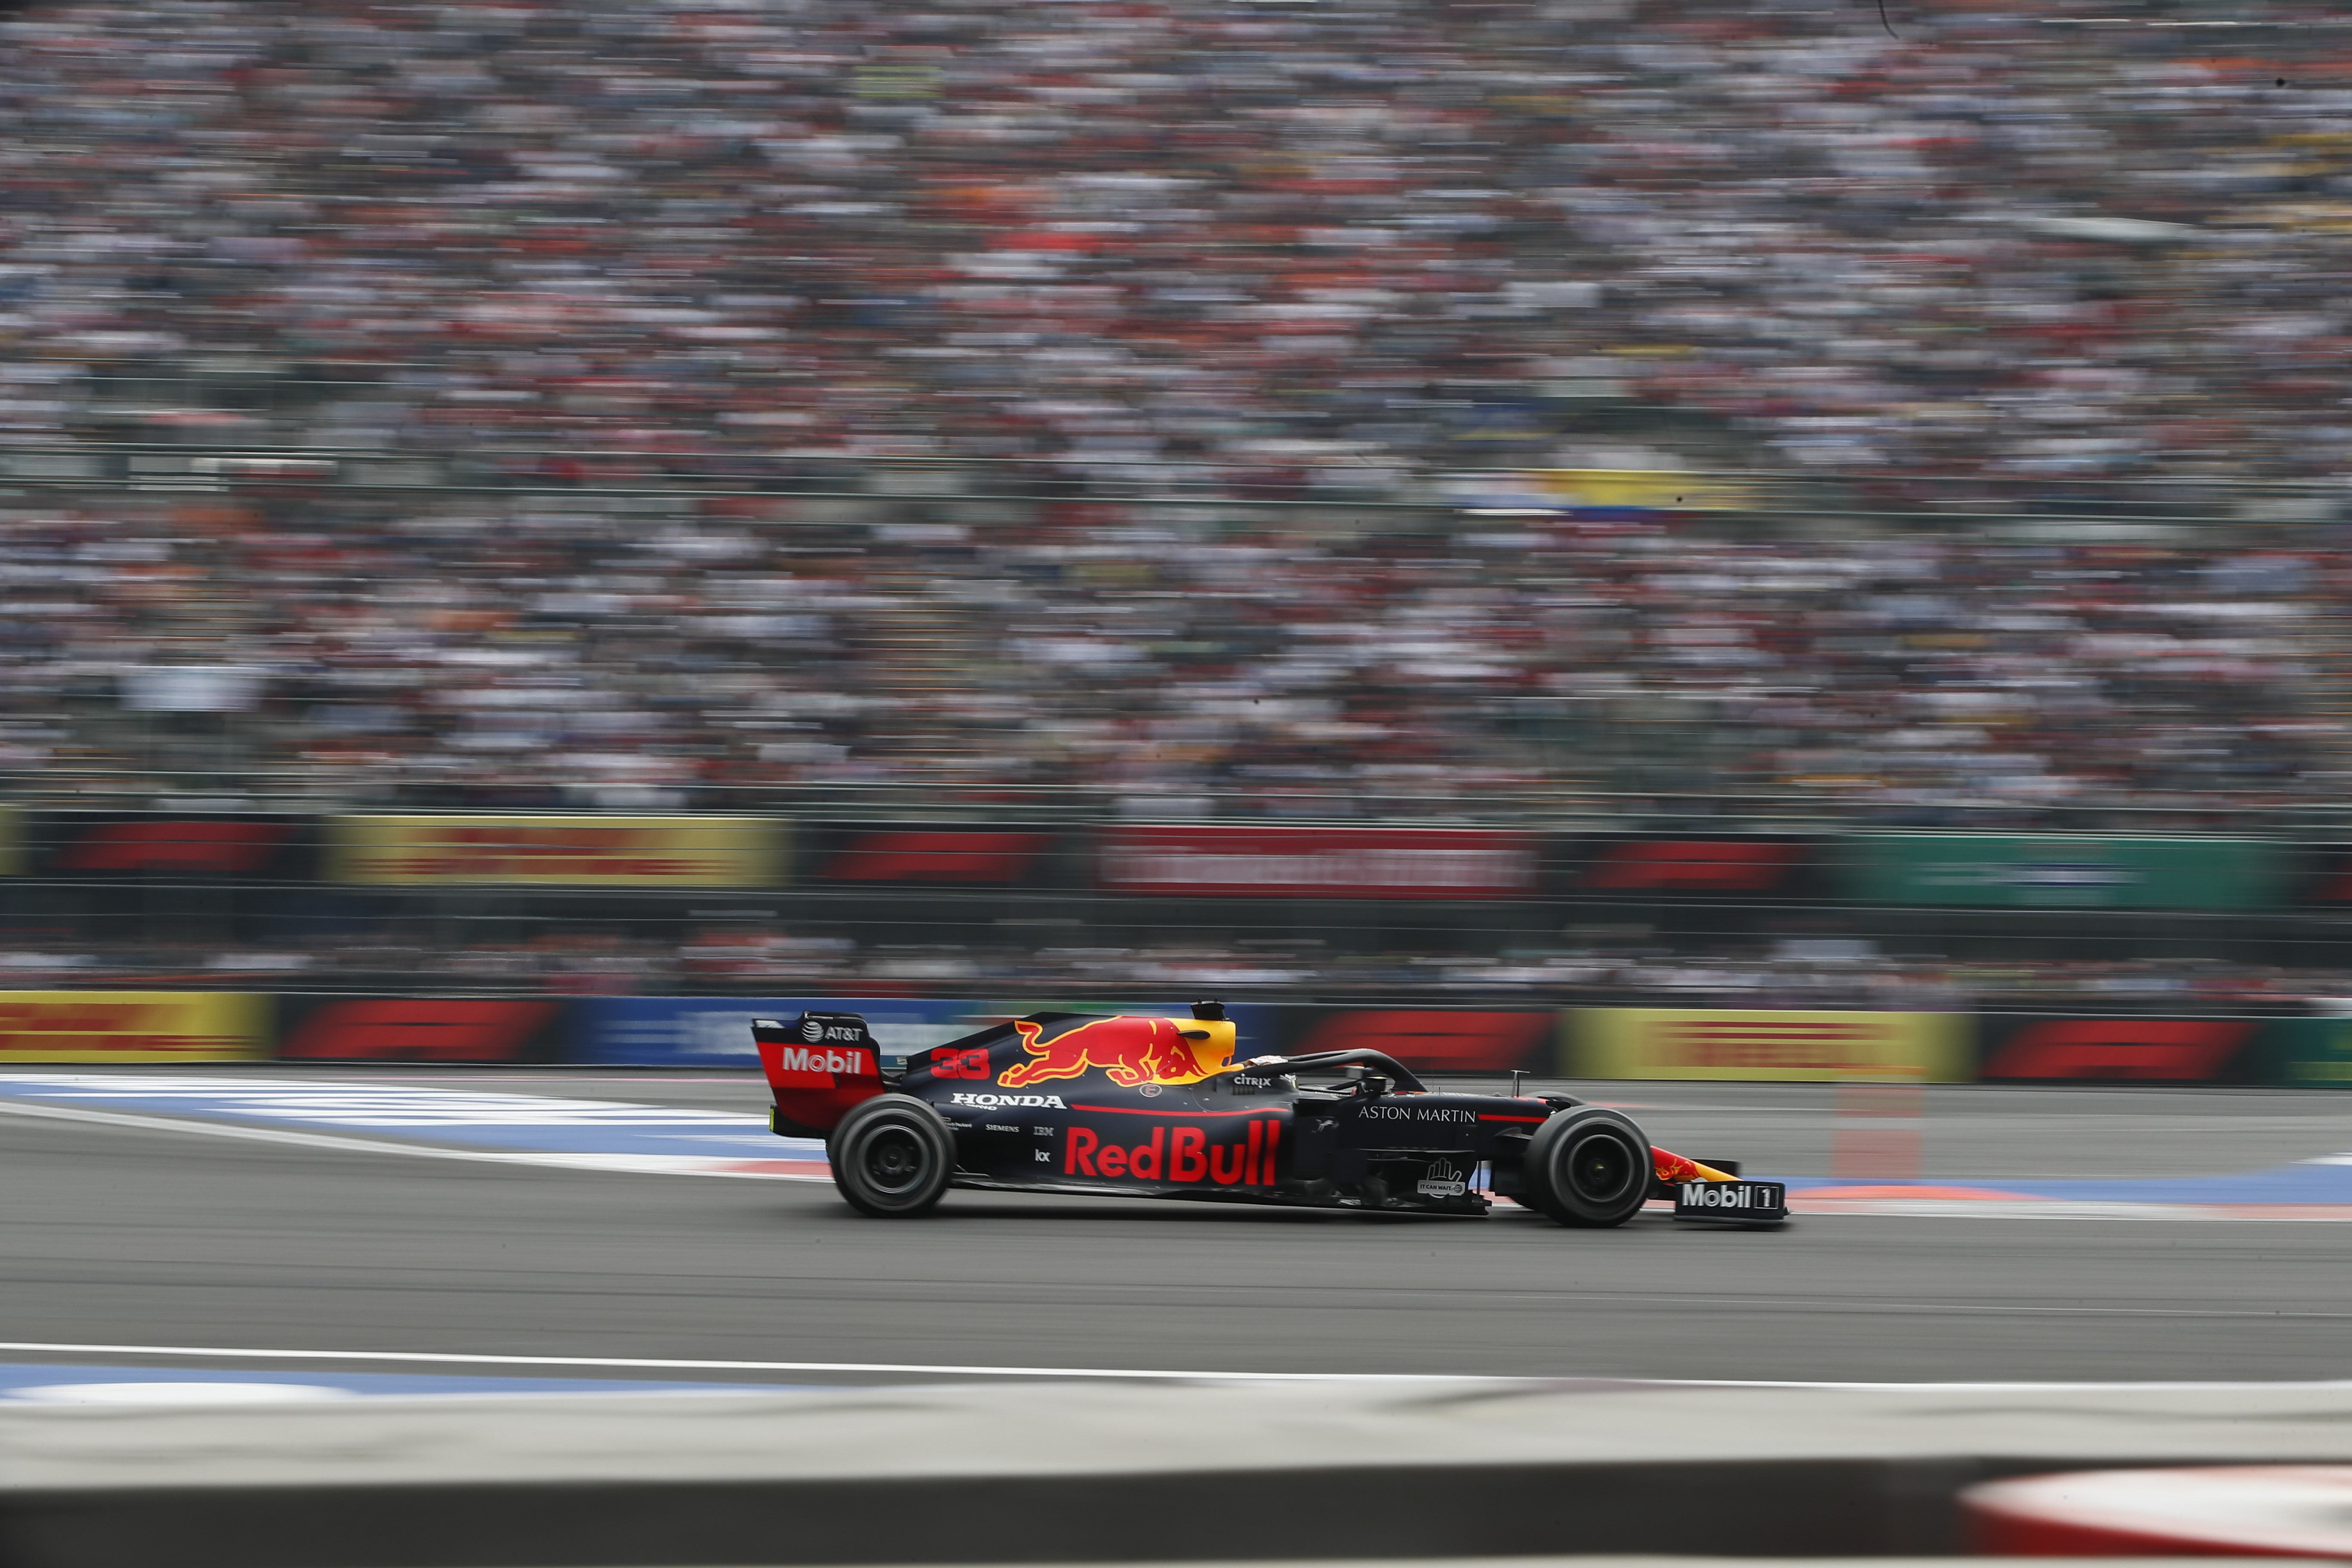 epa07954867 Dutch Max Verstappen of Red Bull competes during the Mexican Grand Prix at the Hermanos Rodriguez Racetrack in Mexico City, Mexico, 27 October 2019.  EPA/JOSE MENDEZ